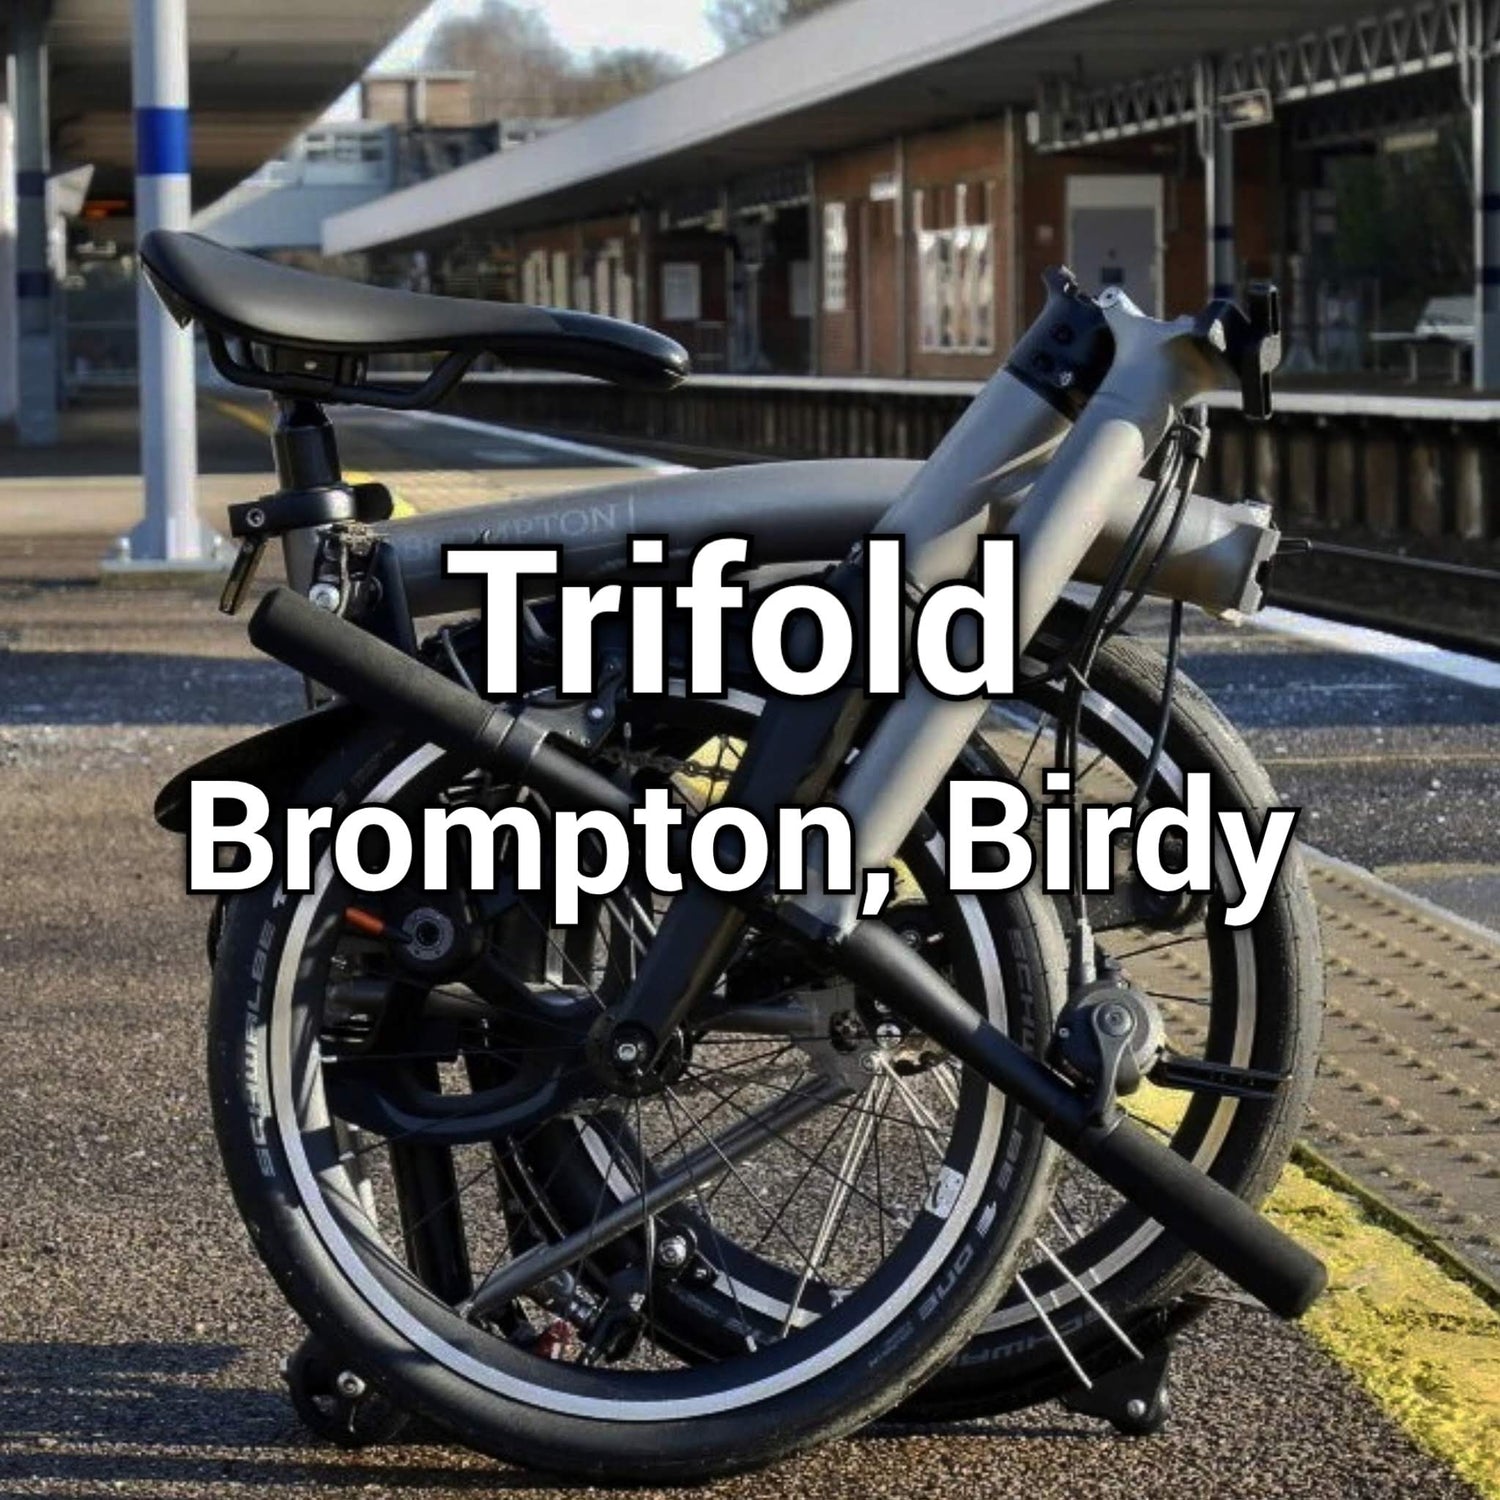 Brompton Birdy Trifold Cover pic catagories for Ti screw